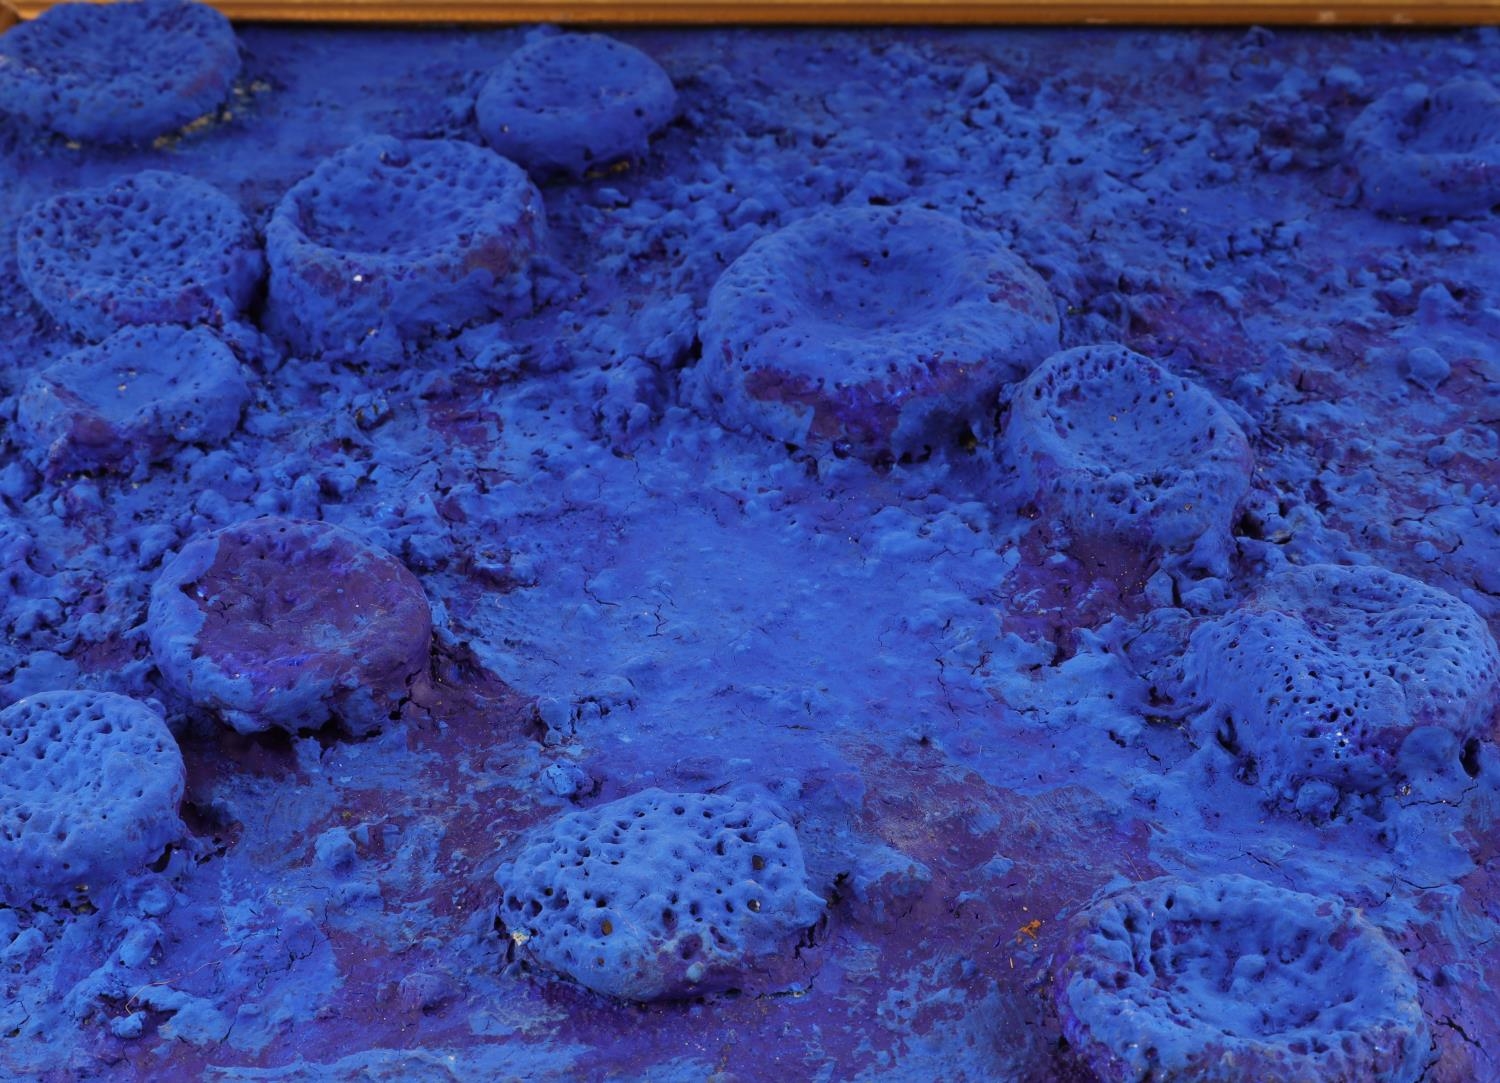 Artwork by Yves Klein, YVES KLEIN BLUE TEXTURAL MODERN ART PAINTING, Made of PAINTING